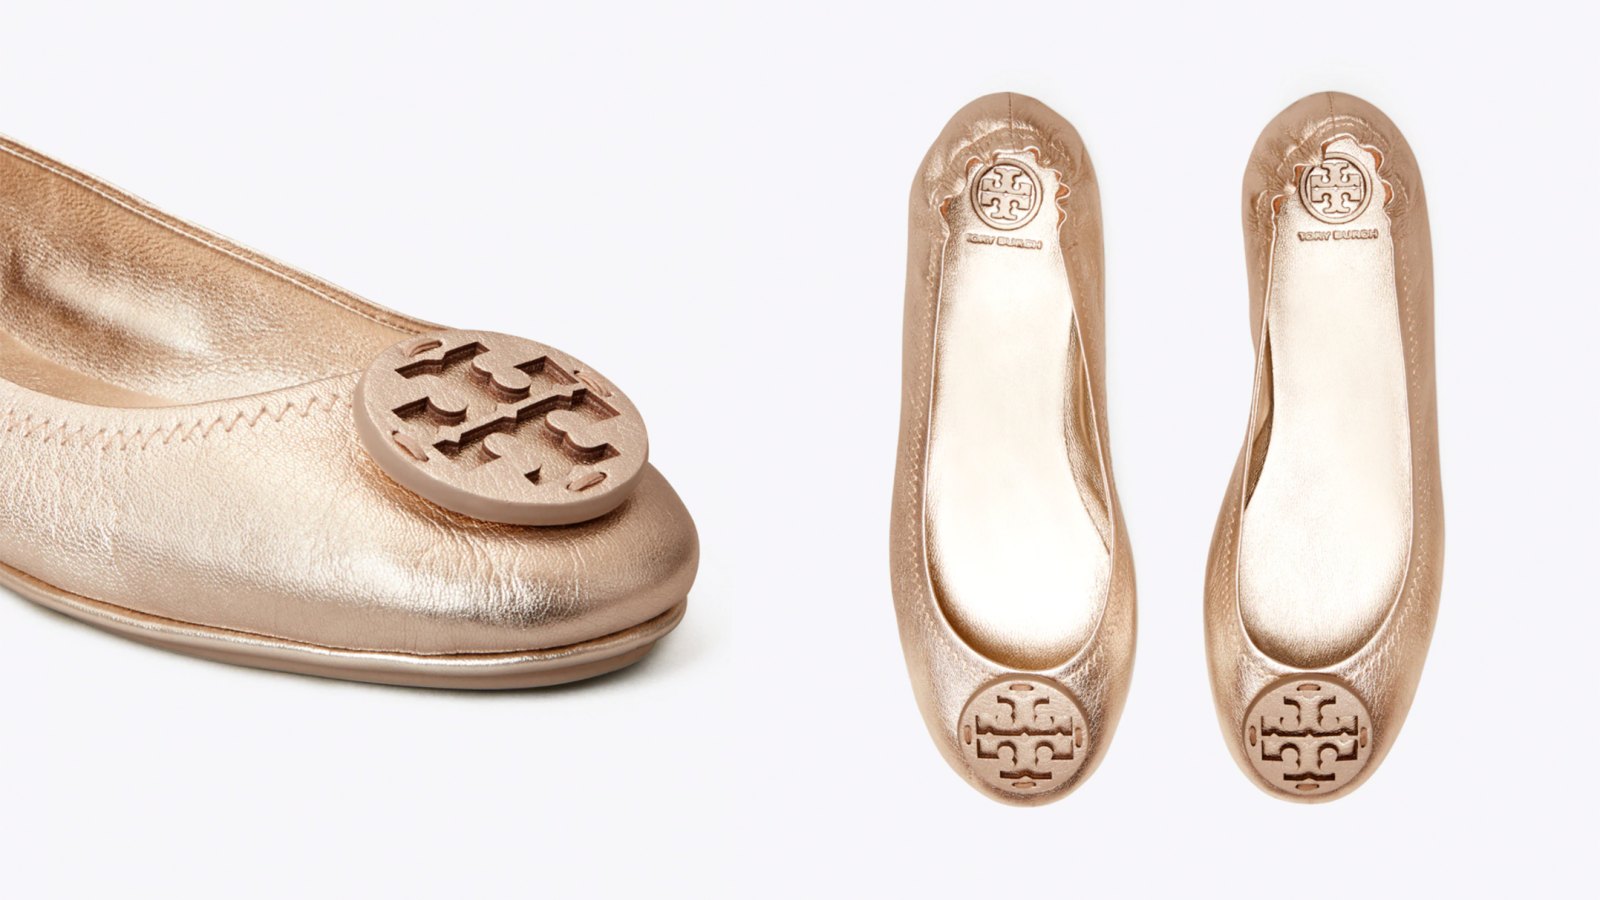 Tory Burch Famous Ballet Flats Are on Sale for Nearly 40% Off